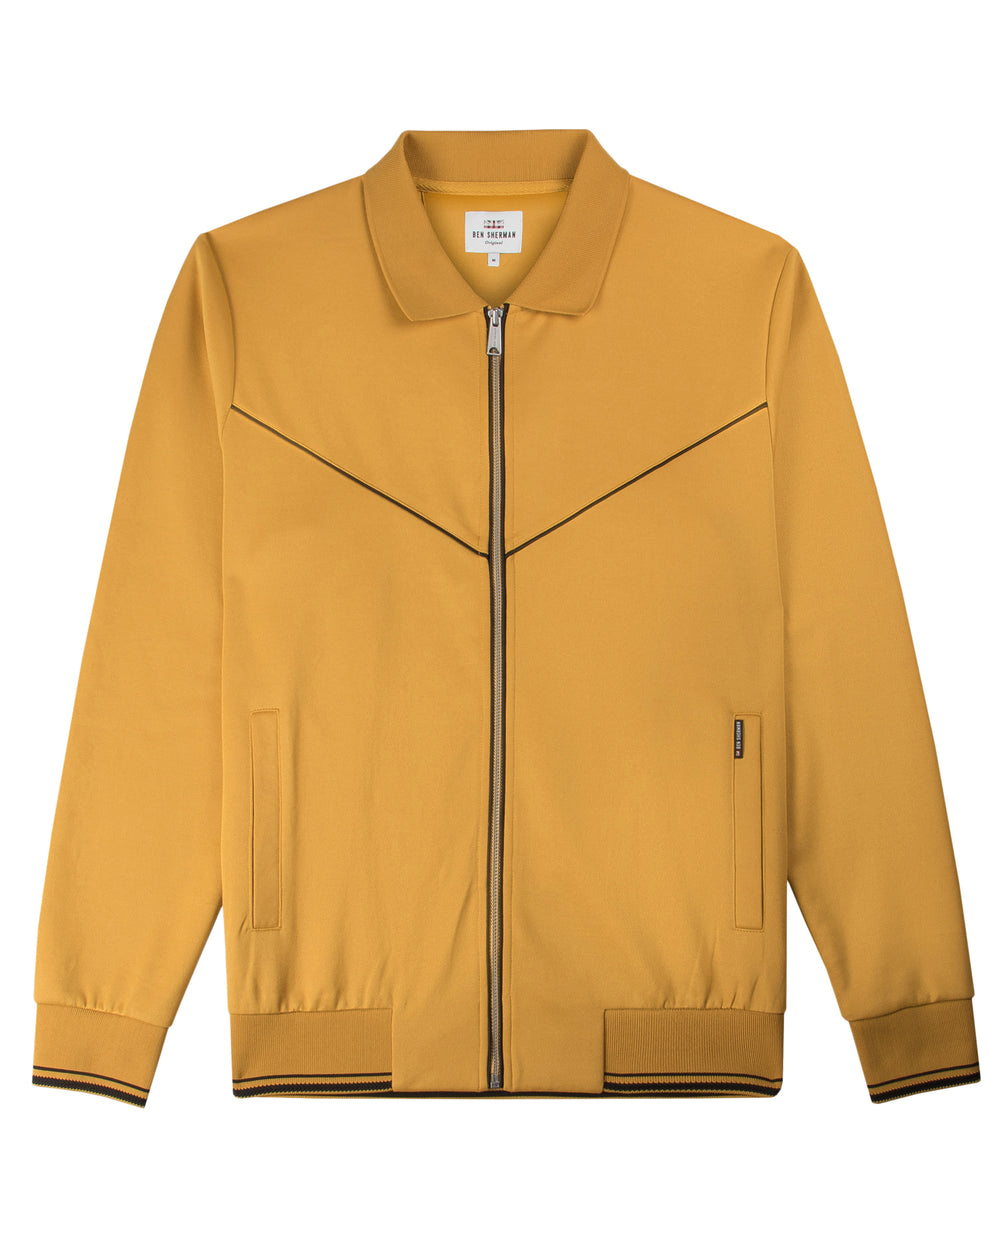 Tricot Track Top Jacket - Yellow